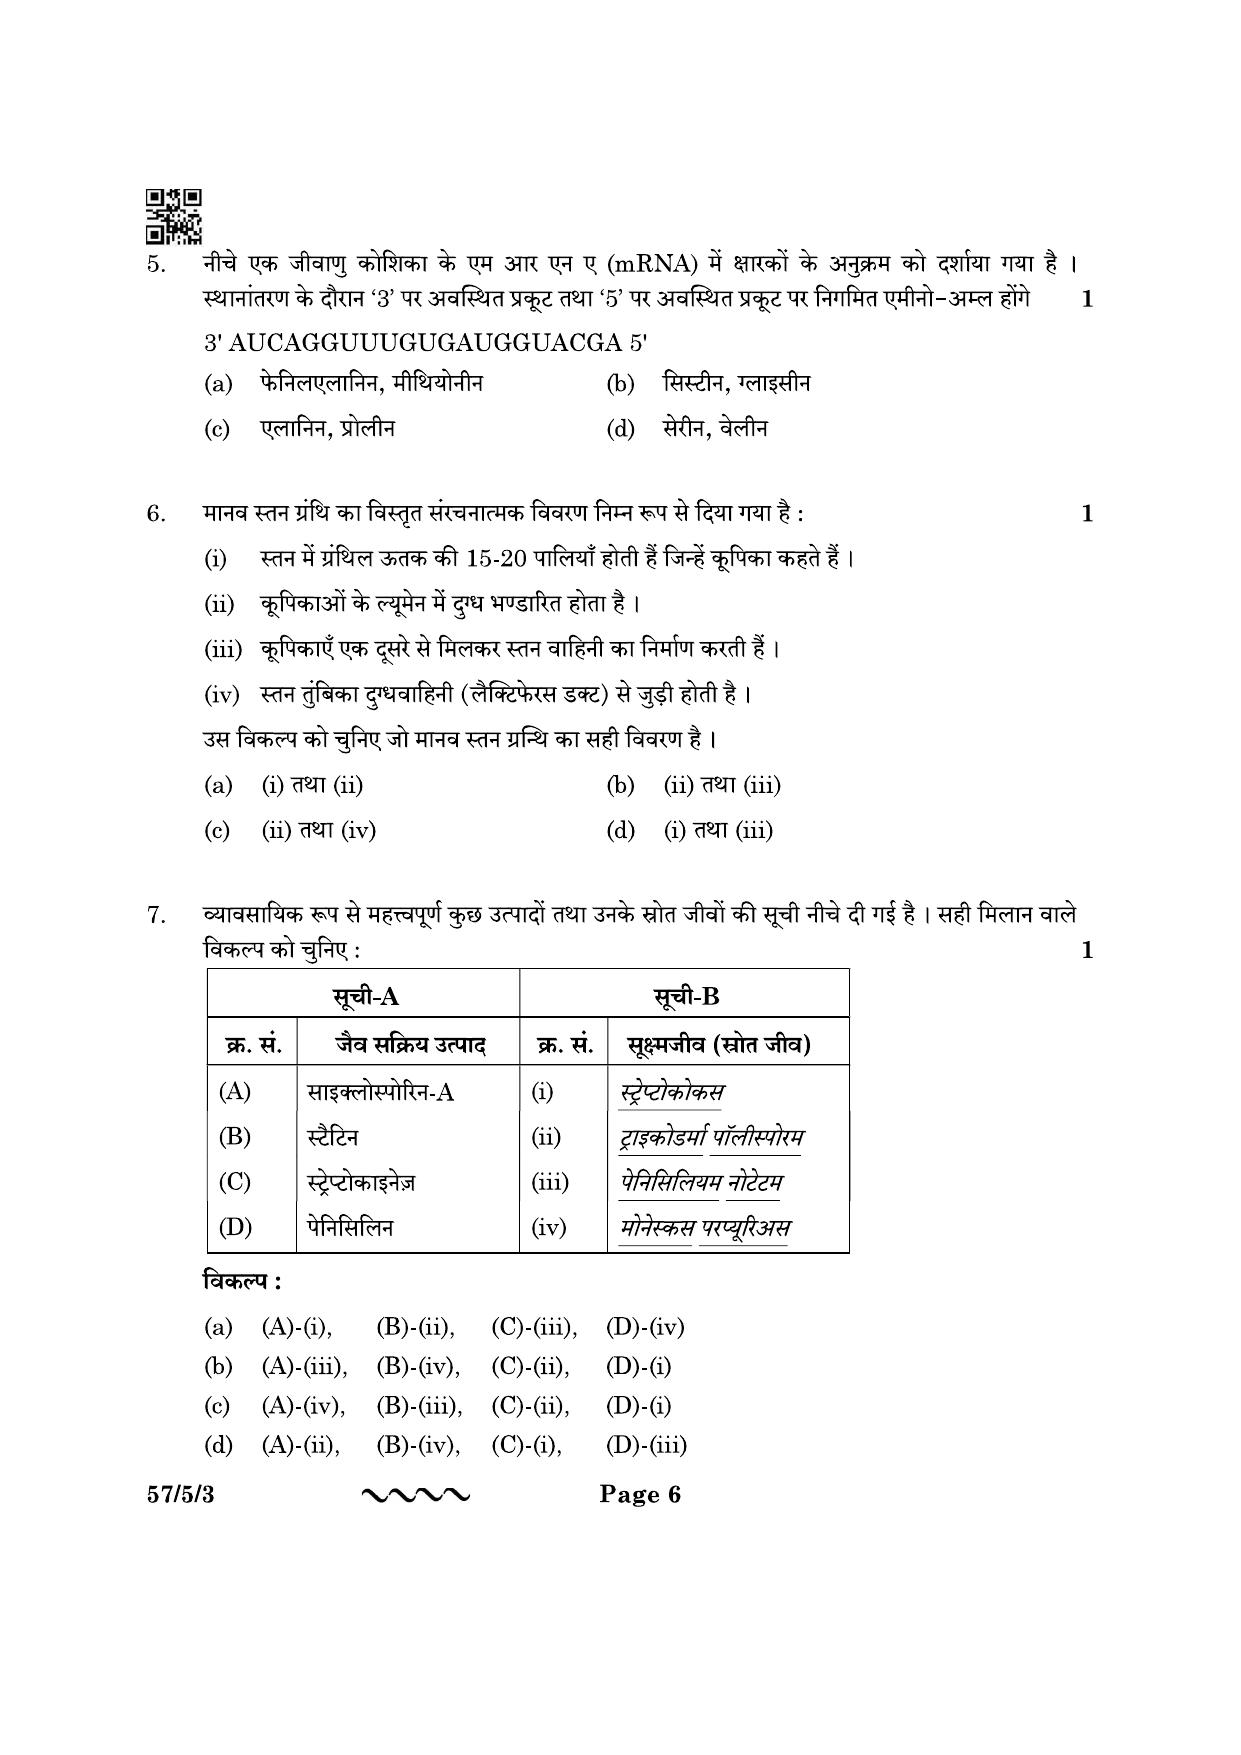 CBSE Class 12 57-5-3 Biology 2023 Question Paper - Page 6